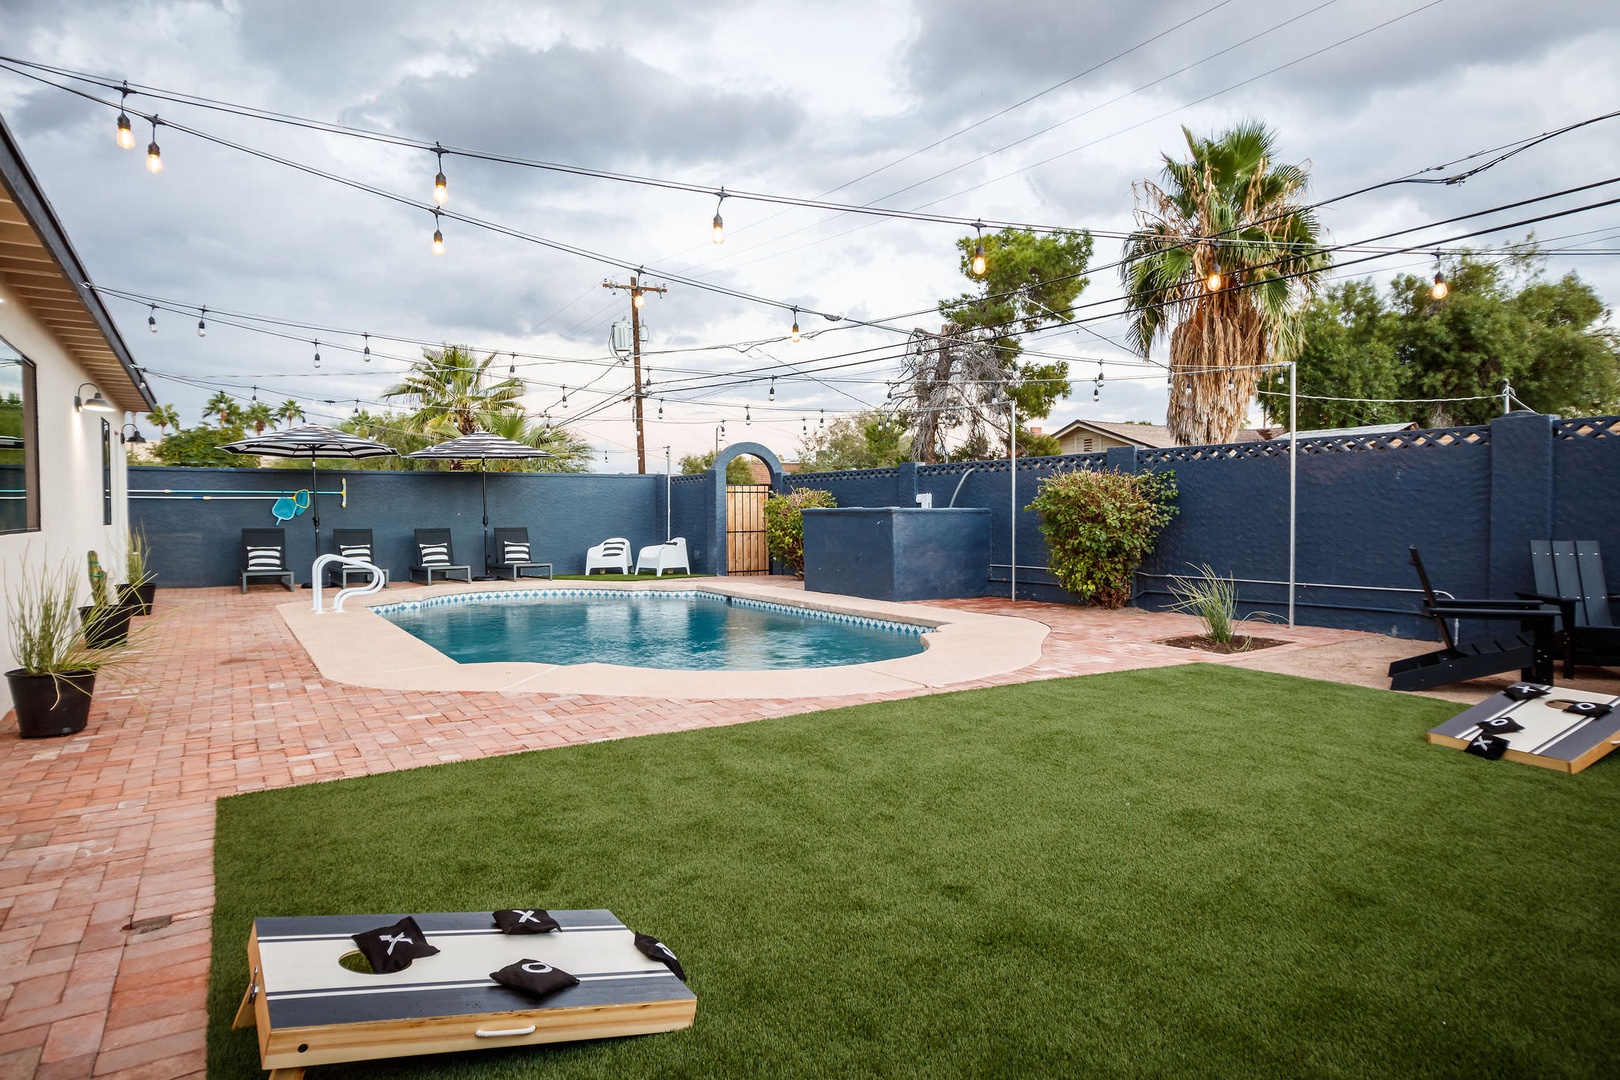 The backyard leaves you in the lap of luxury! Enjoy the pool, lounge areas, or a friendly game of cornhole